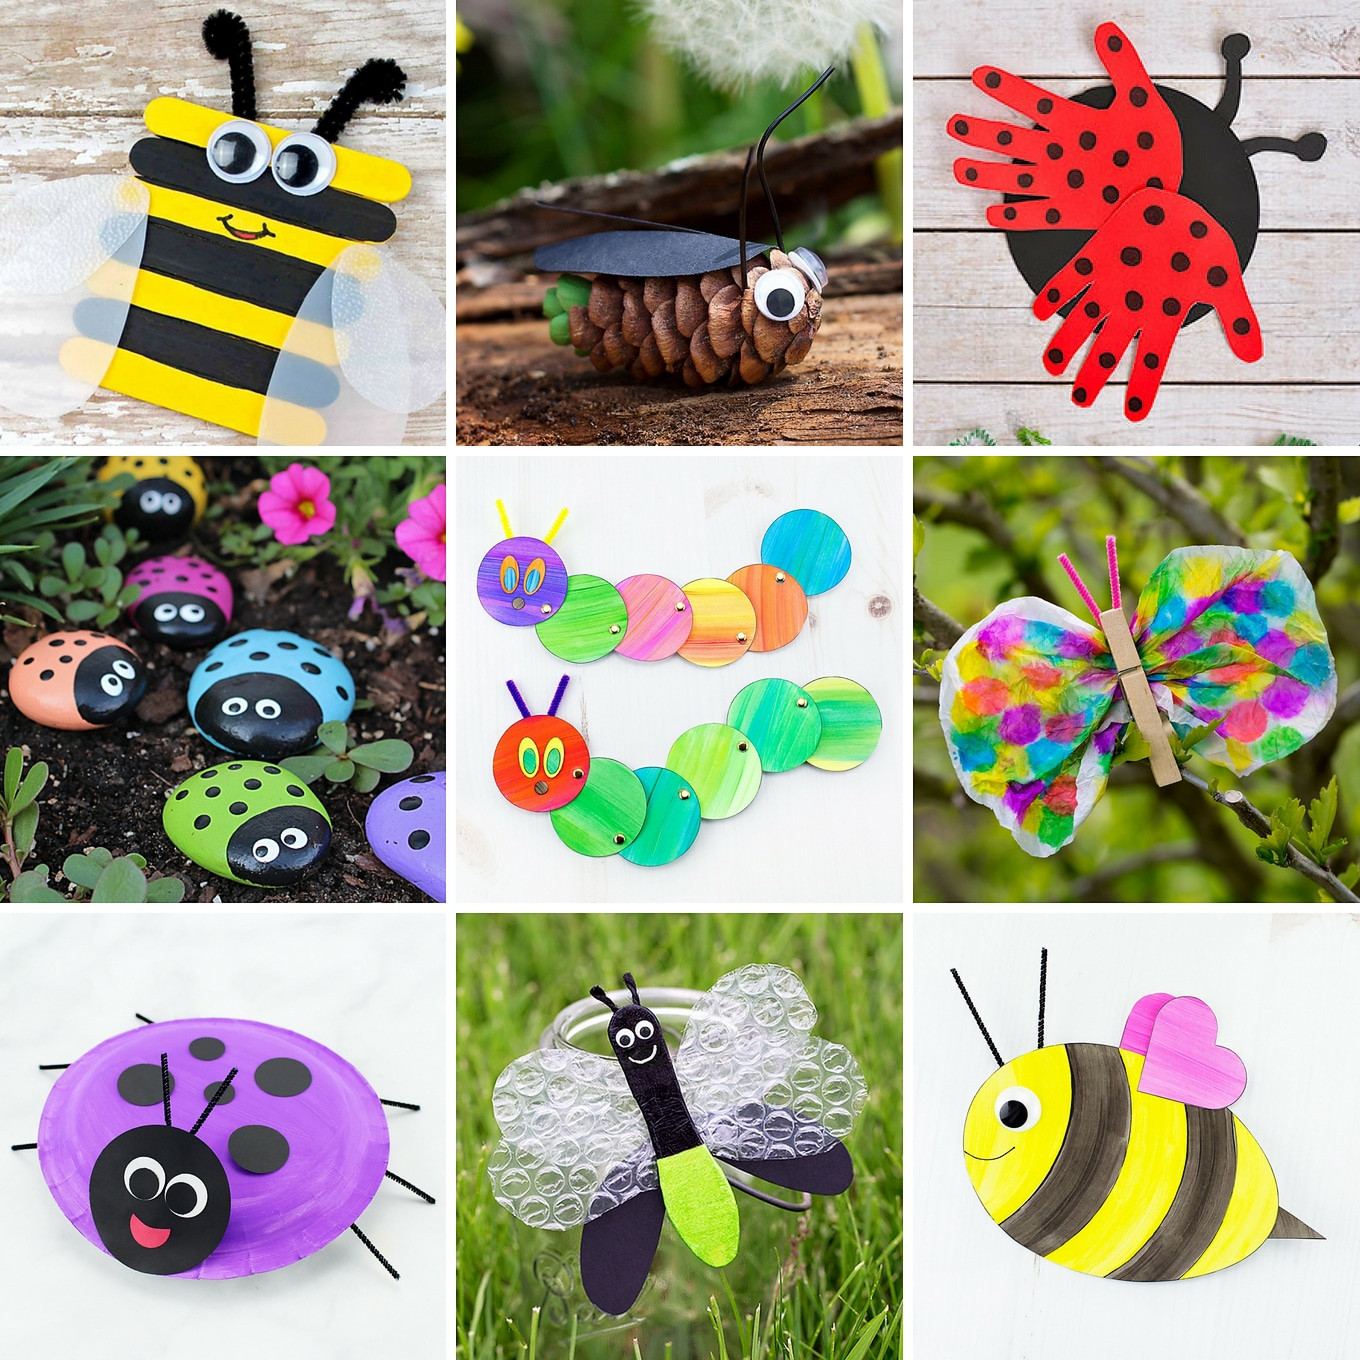 Bug Crafts For Kids
 The Most Easy and Fun Insect Crafts for Kids